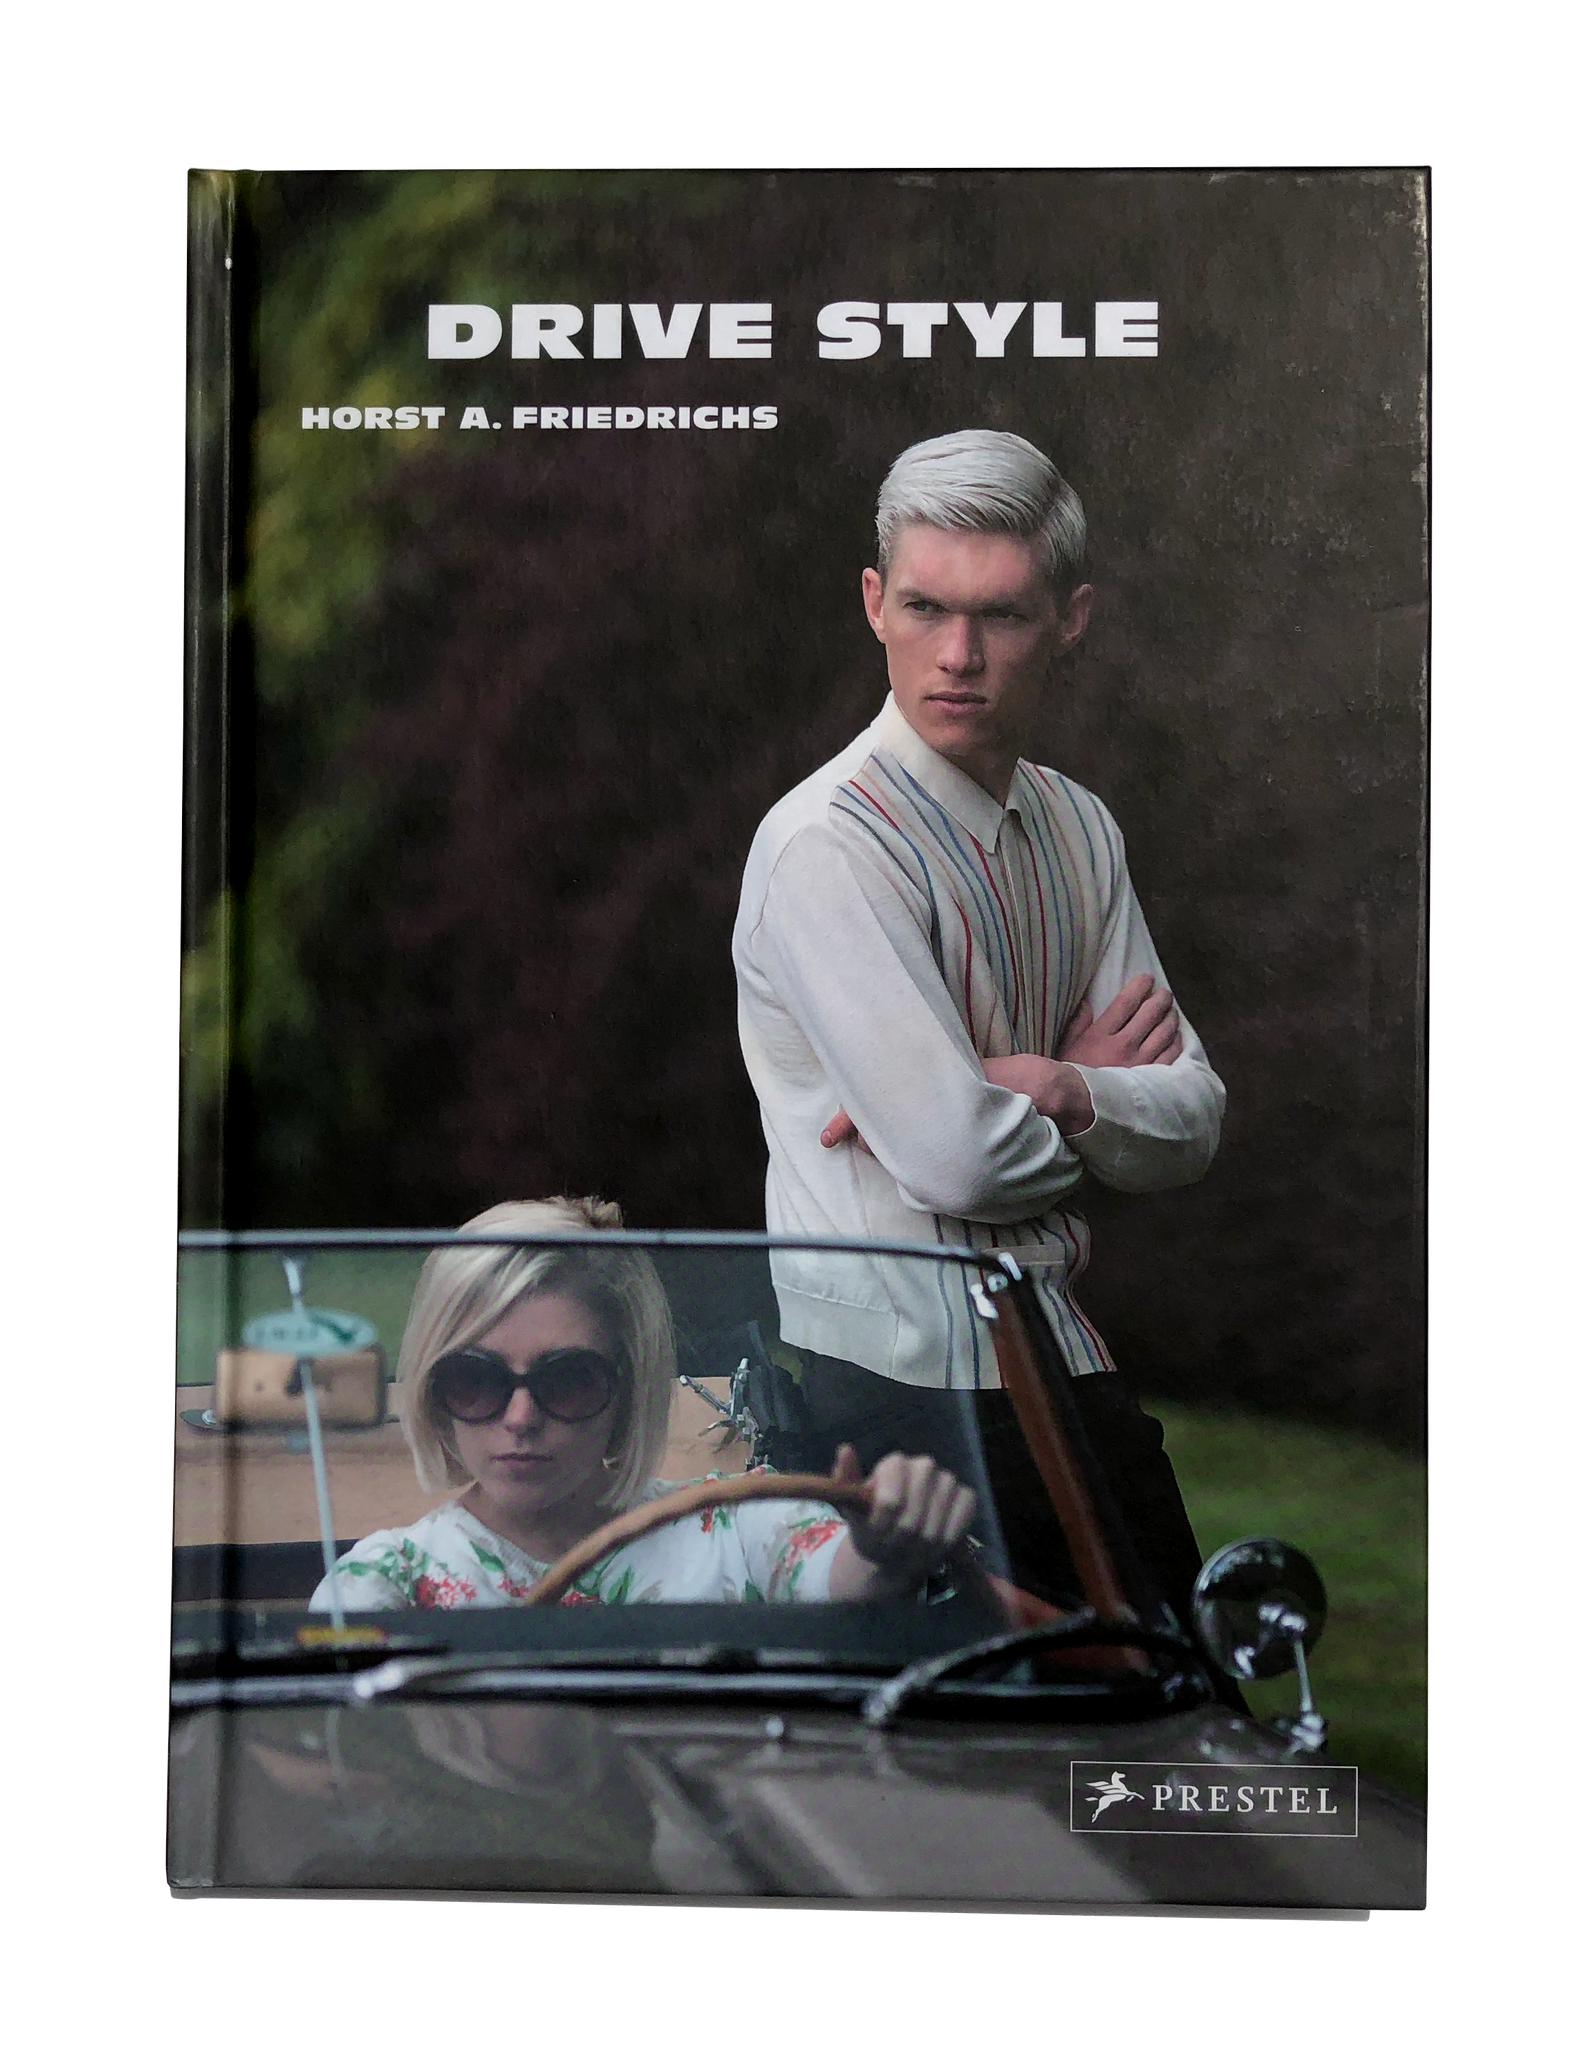 Drive Style by Horst A. Friedrichs